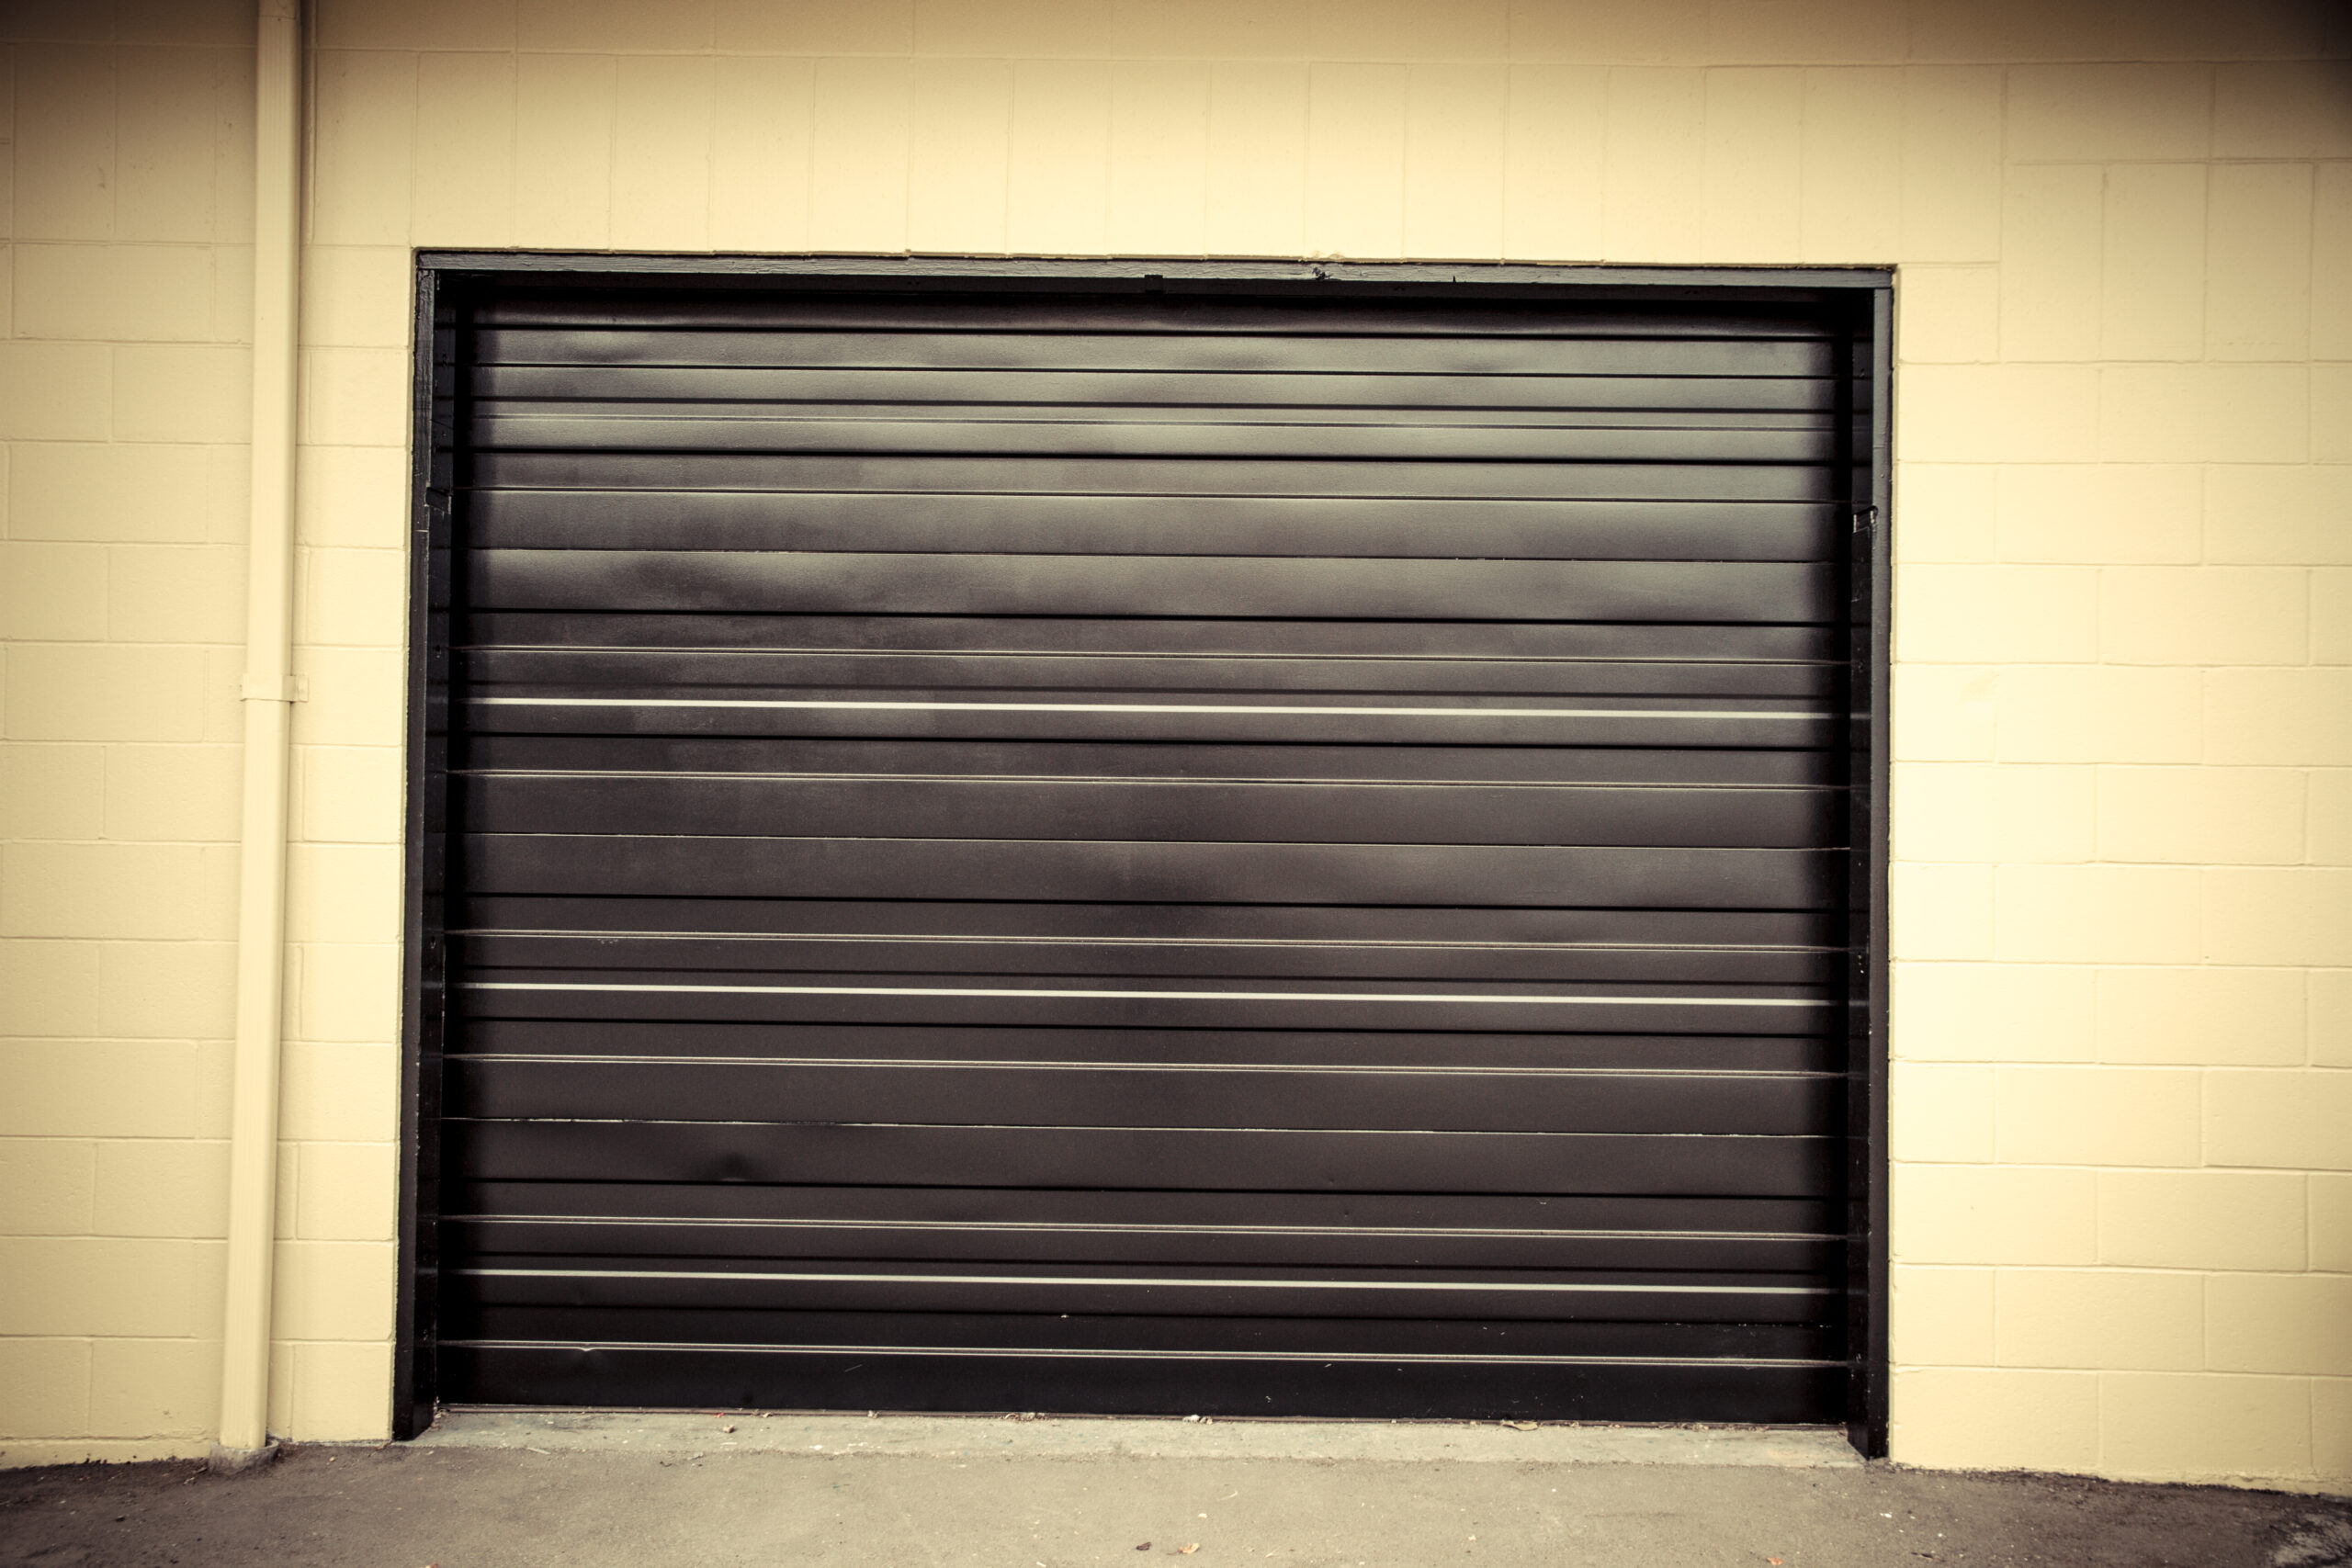 Fixing a Faulty Garage Door: Step-by-Step Guide